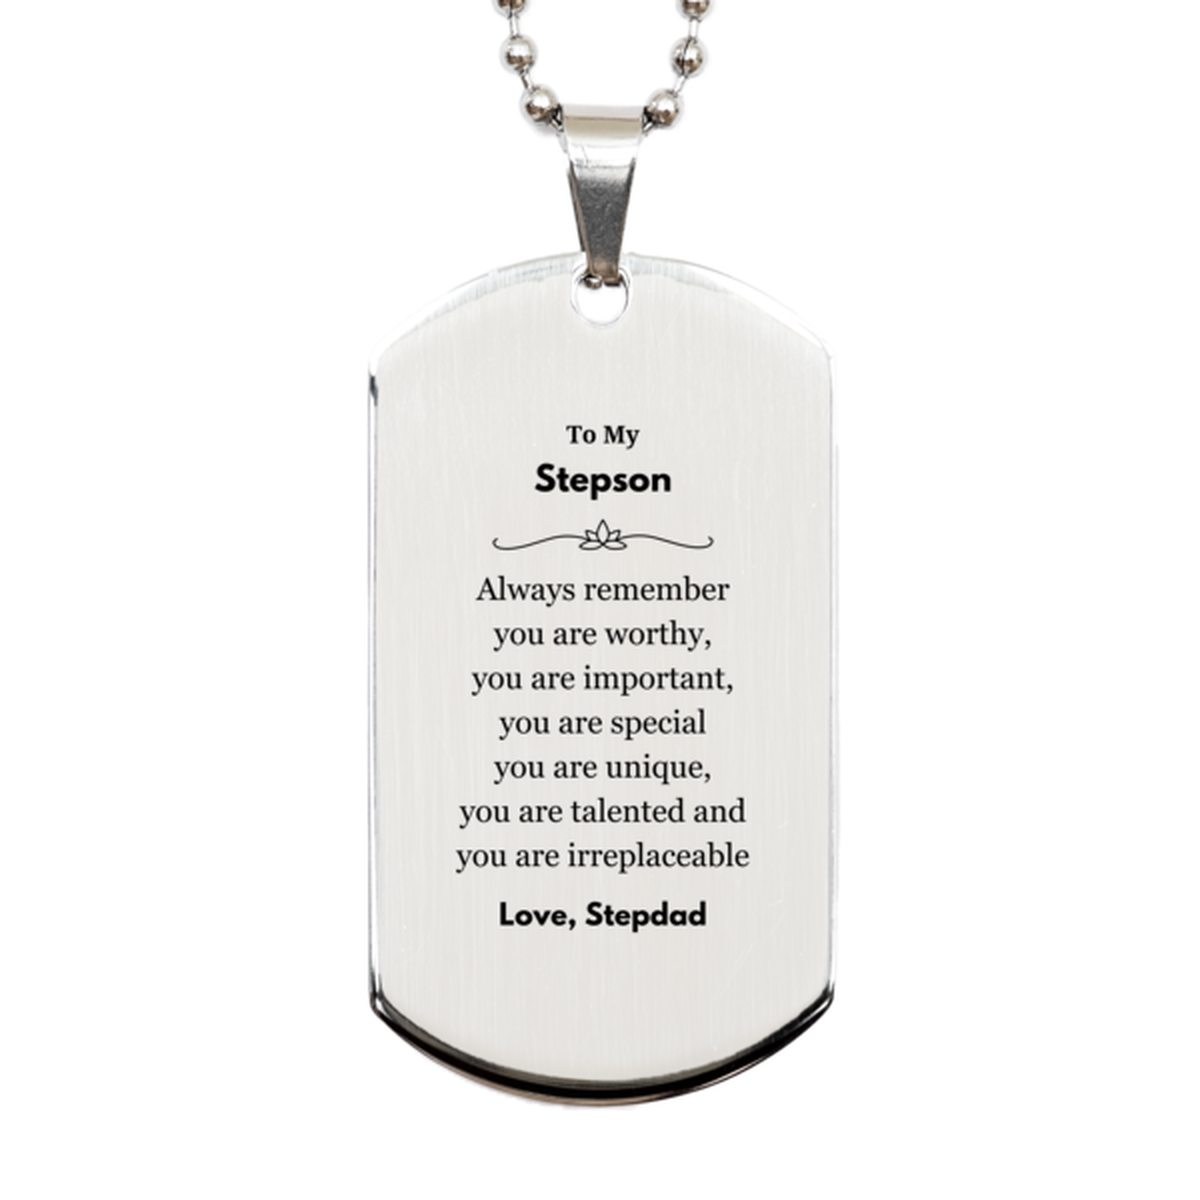 Stepson Birthday Gifts from Stepdad, Inspirational Silver Dog Tag for Stepson Christmas Graduation Gifts for Stepson Always remember you are worthy, you are important. Love, Stepdad